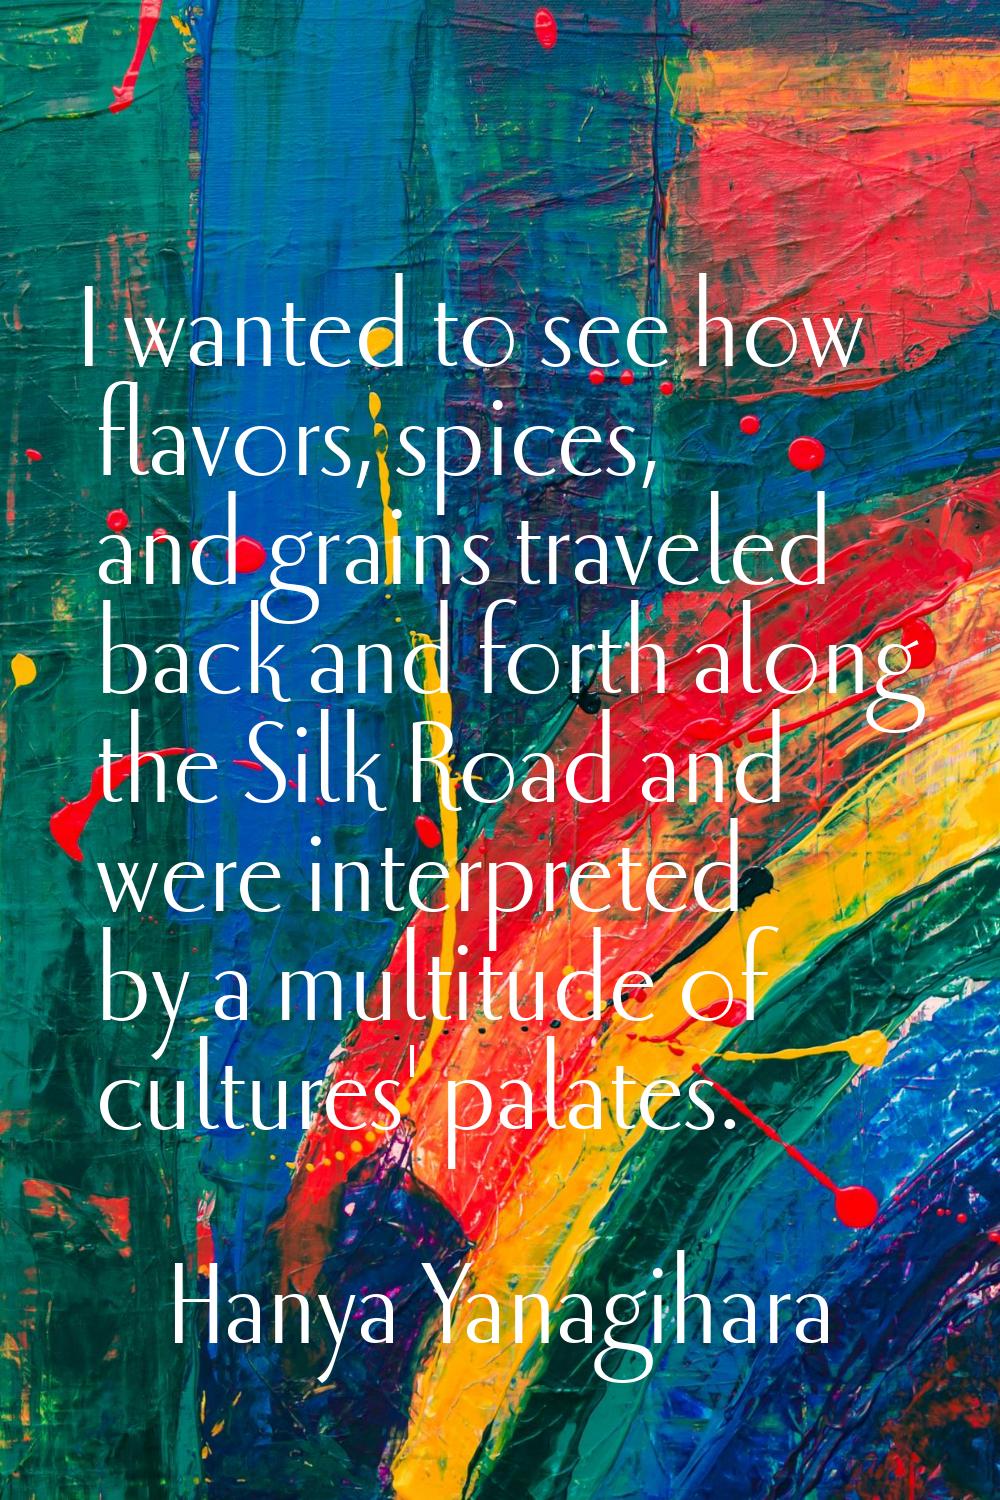 I wanted to see how flavors, spices, and grains traveled back and forth along the Silk Road and wer